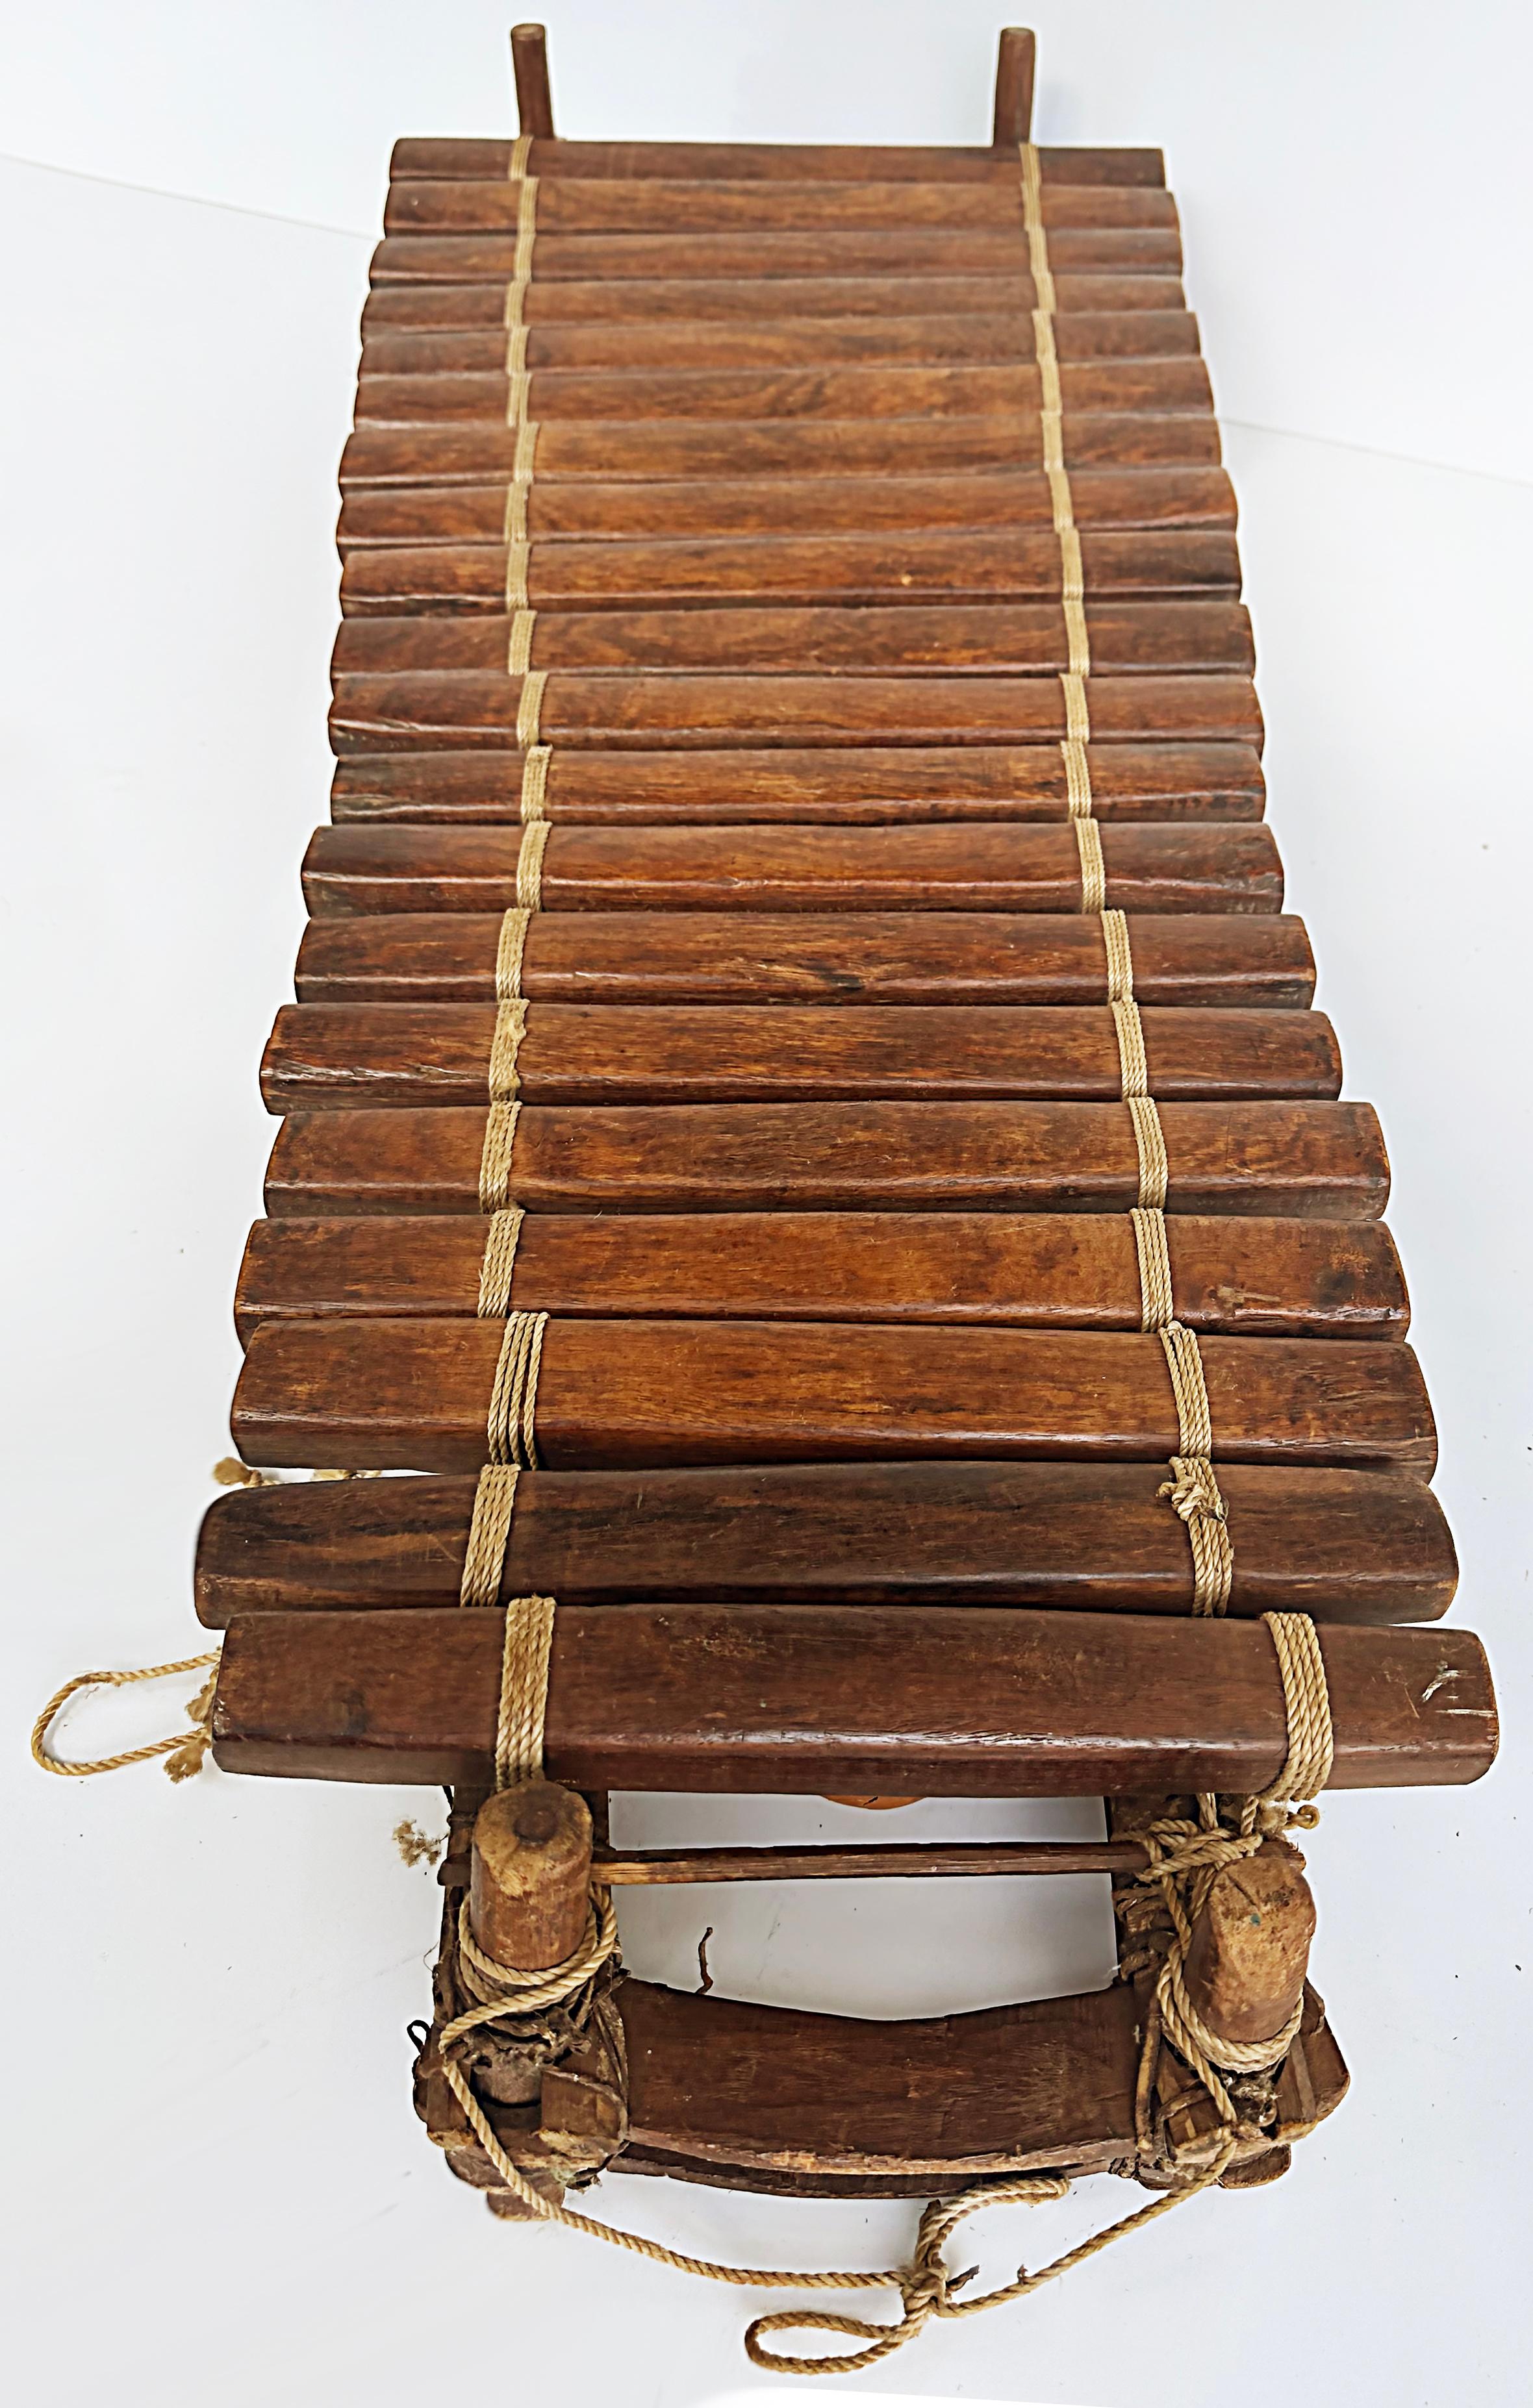 20th century Rustic African Xylophone with Wood, Gourds, Rope, and Mallets

Offered for sale is a 20th century rustic African xylophone with wood, gourds, rope, and mallets. The wood xylophone is assembled with rope and gourds. It has two mallets